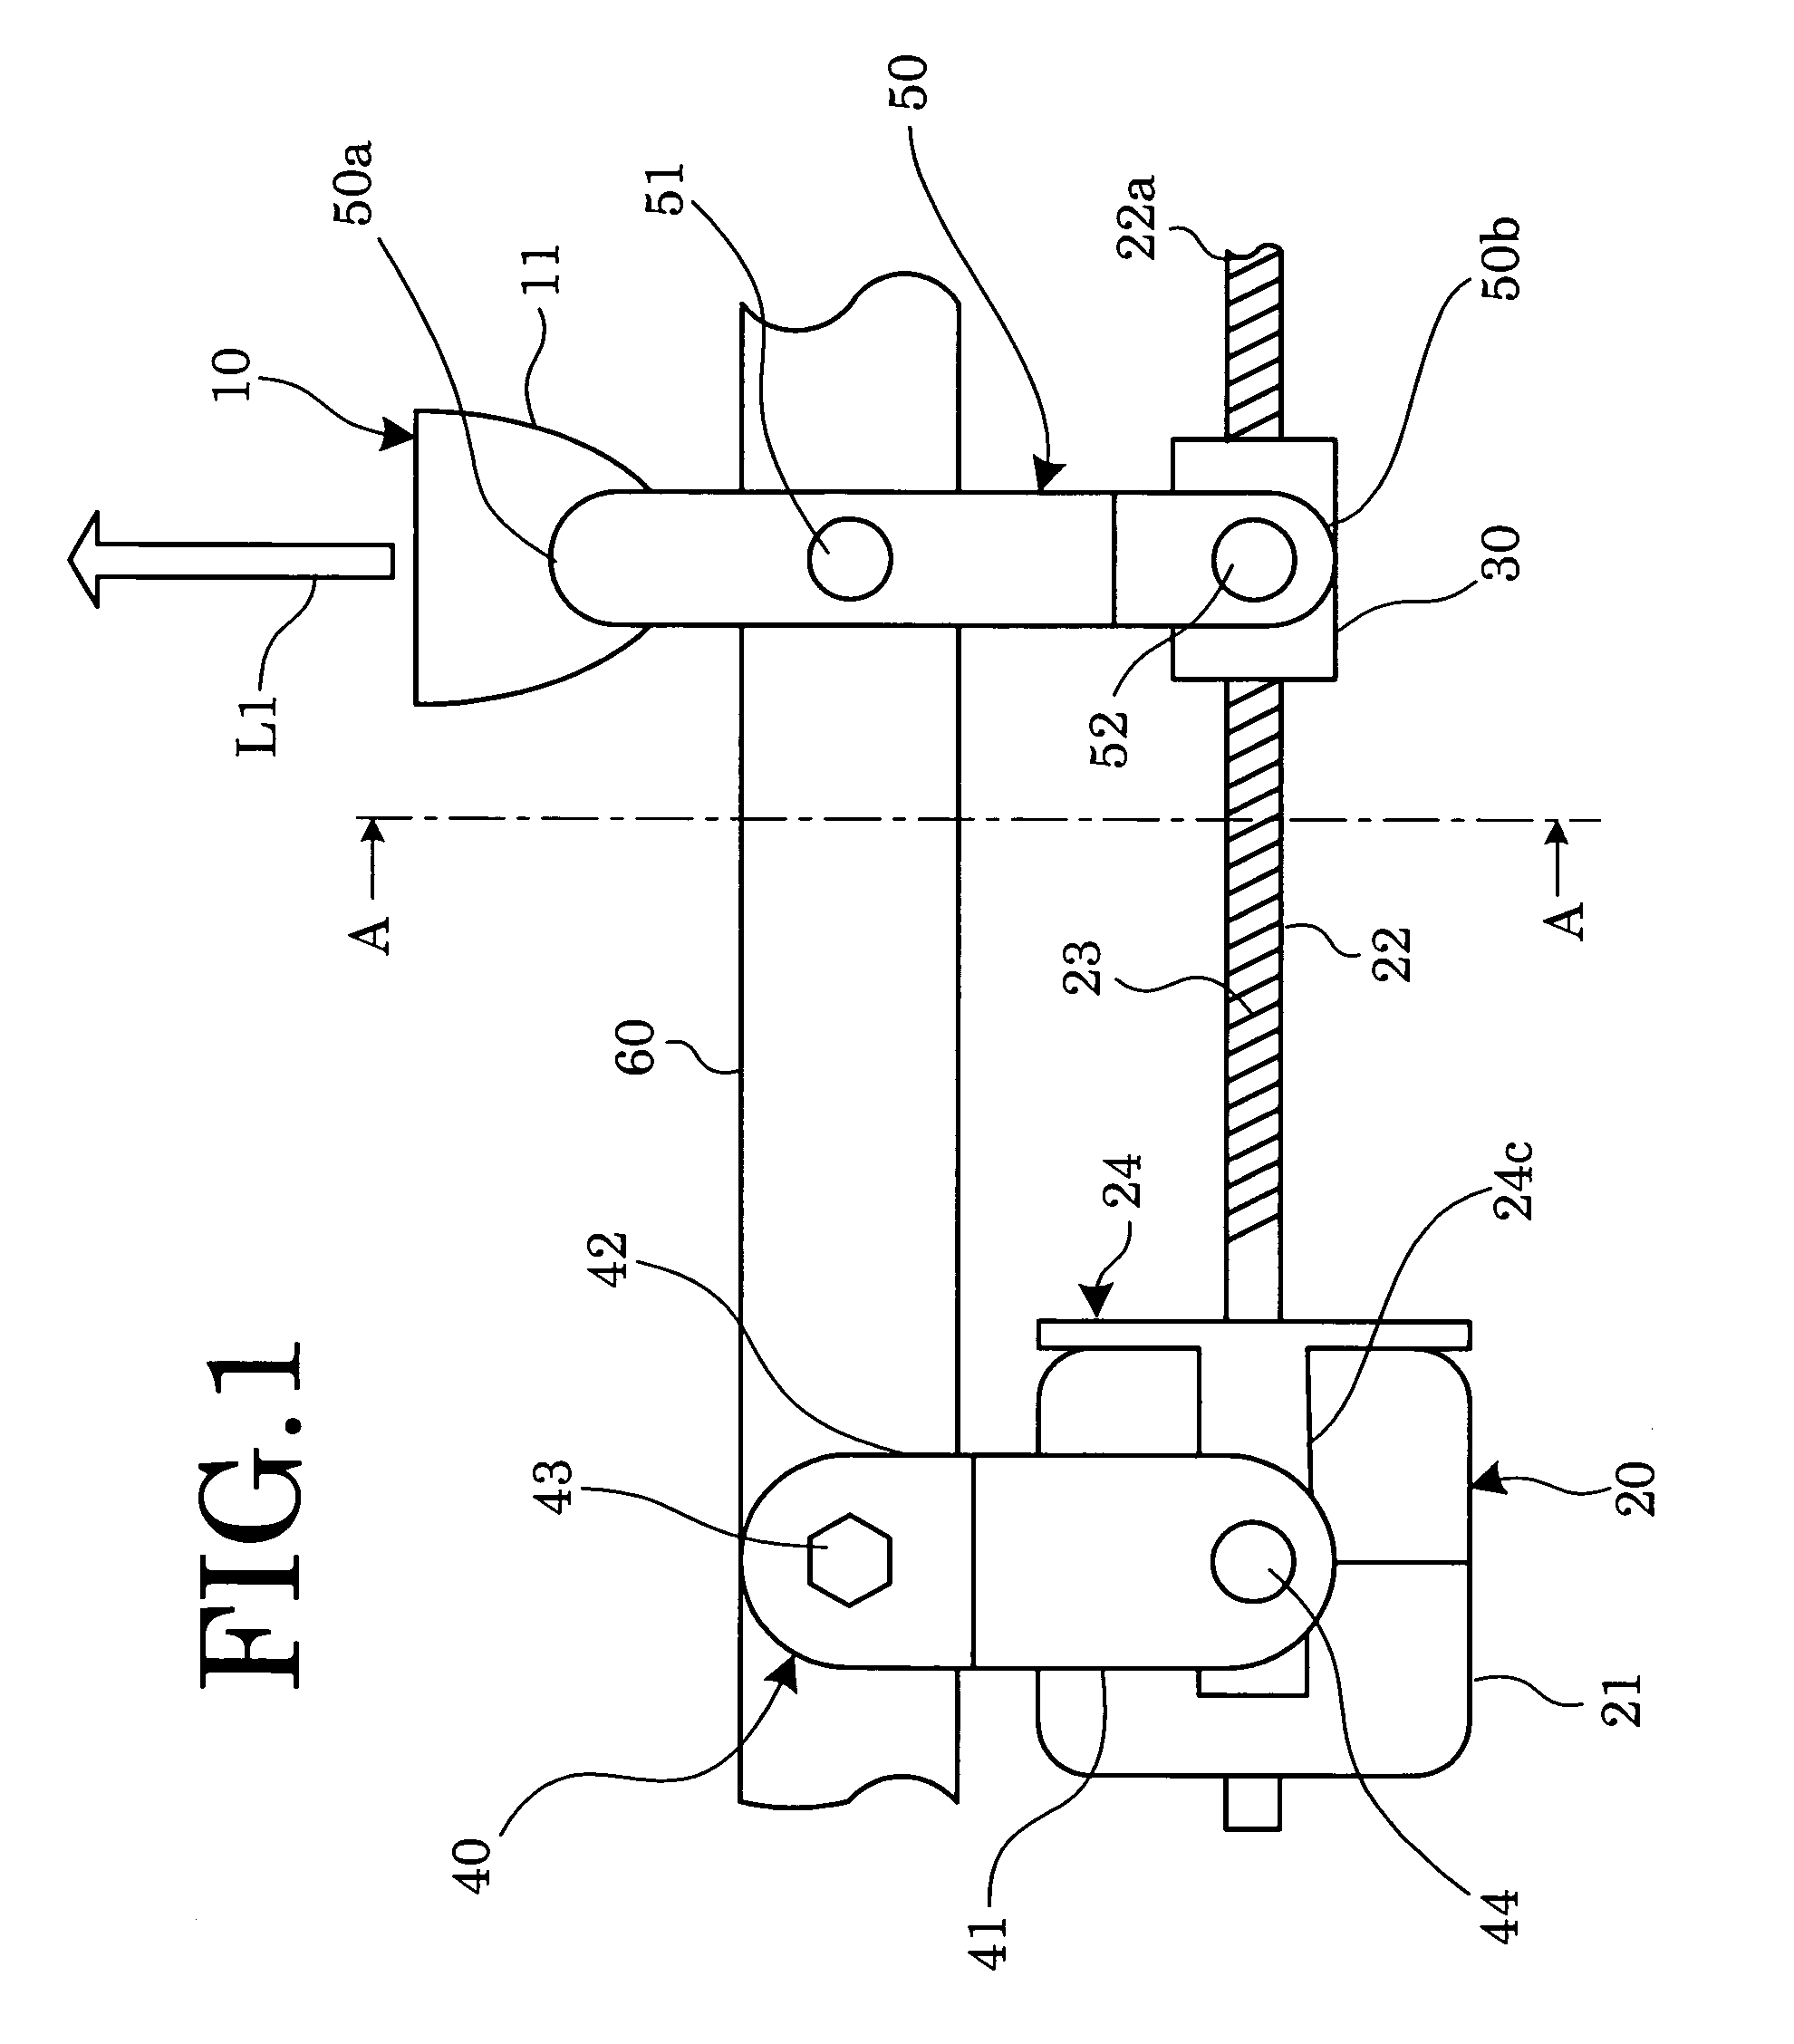 Mechanism for deflecting headlamp optical axis without speed reduction gears